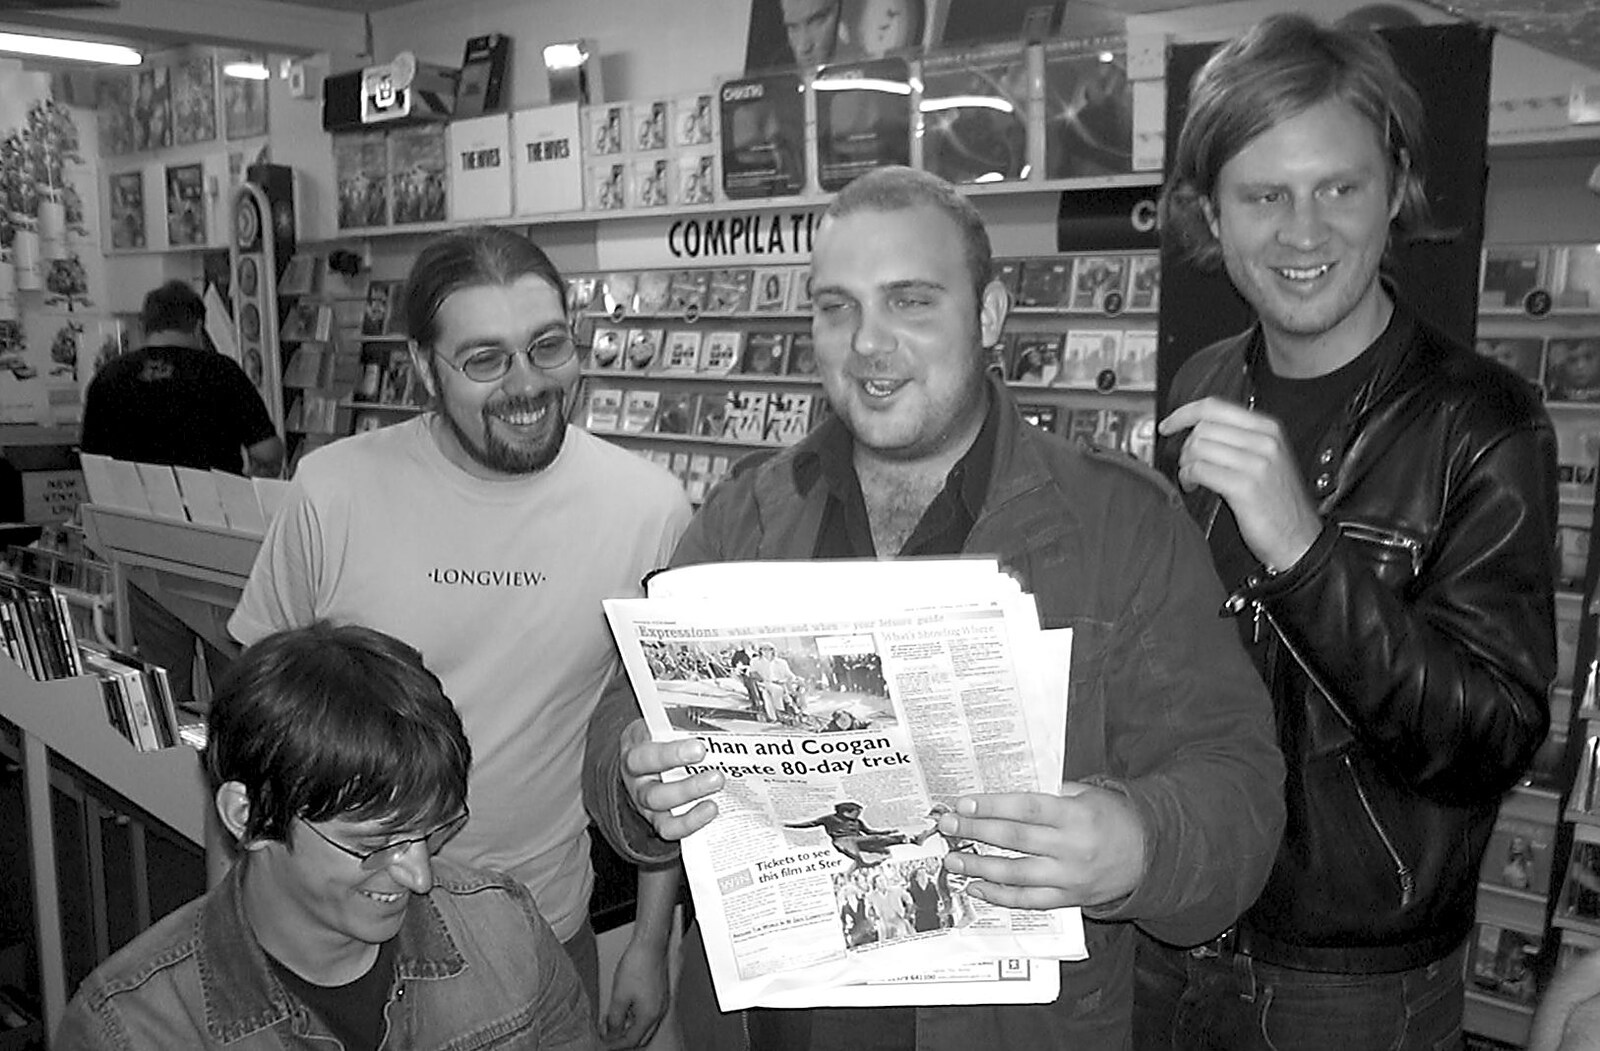 The band's pinnacle is being in the Diss Express from Longview play Revolution Records, Diss, Norfolk - 2nd July 2004